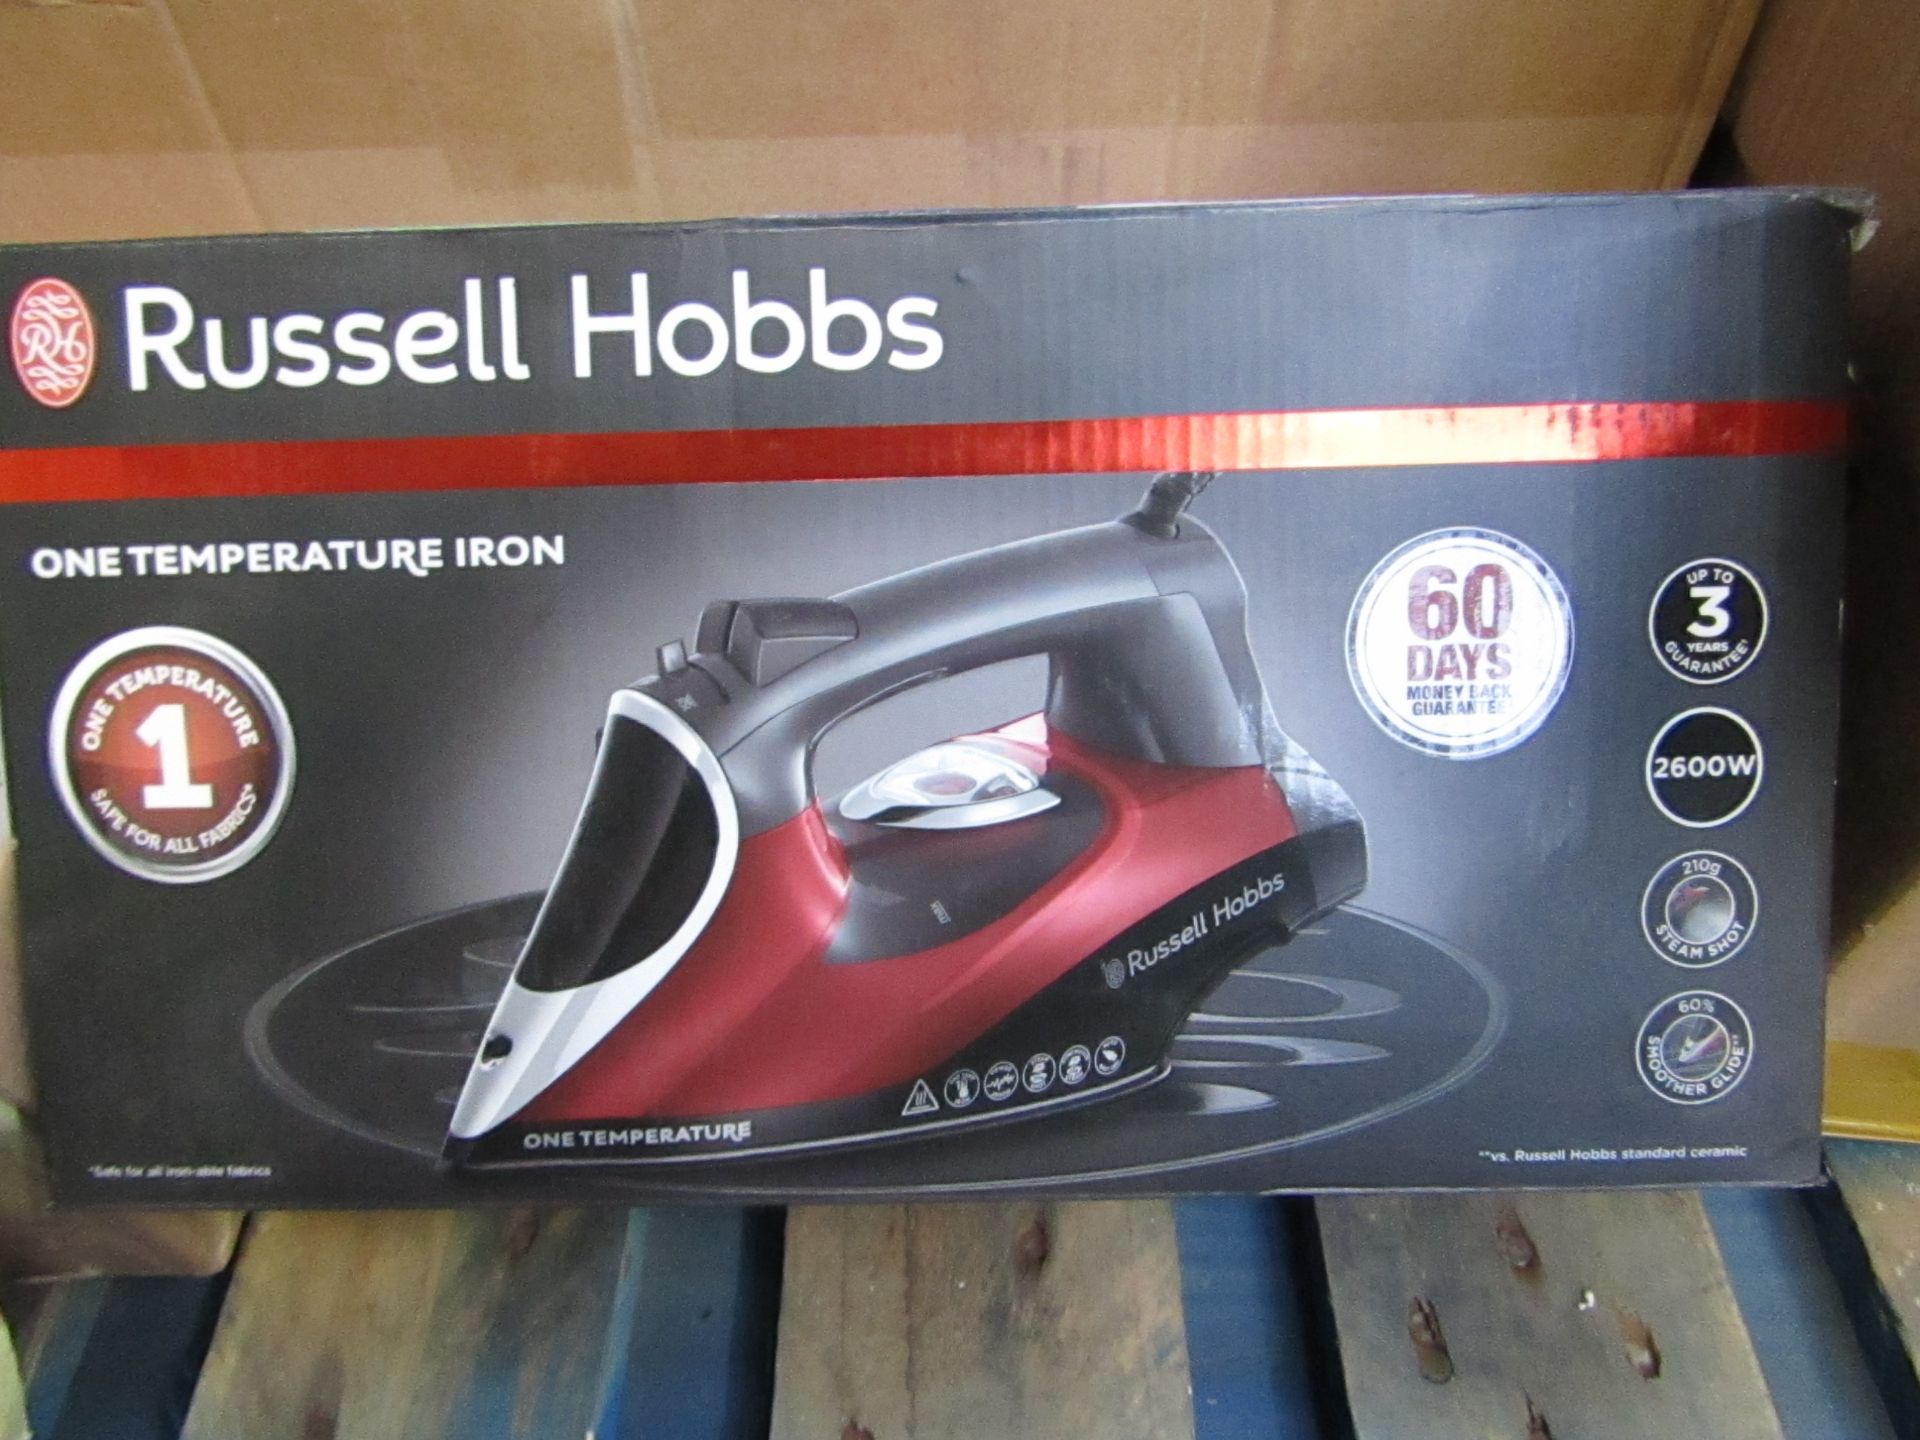 Russell Hobbs one temperature steam iron, powers on and boxed.